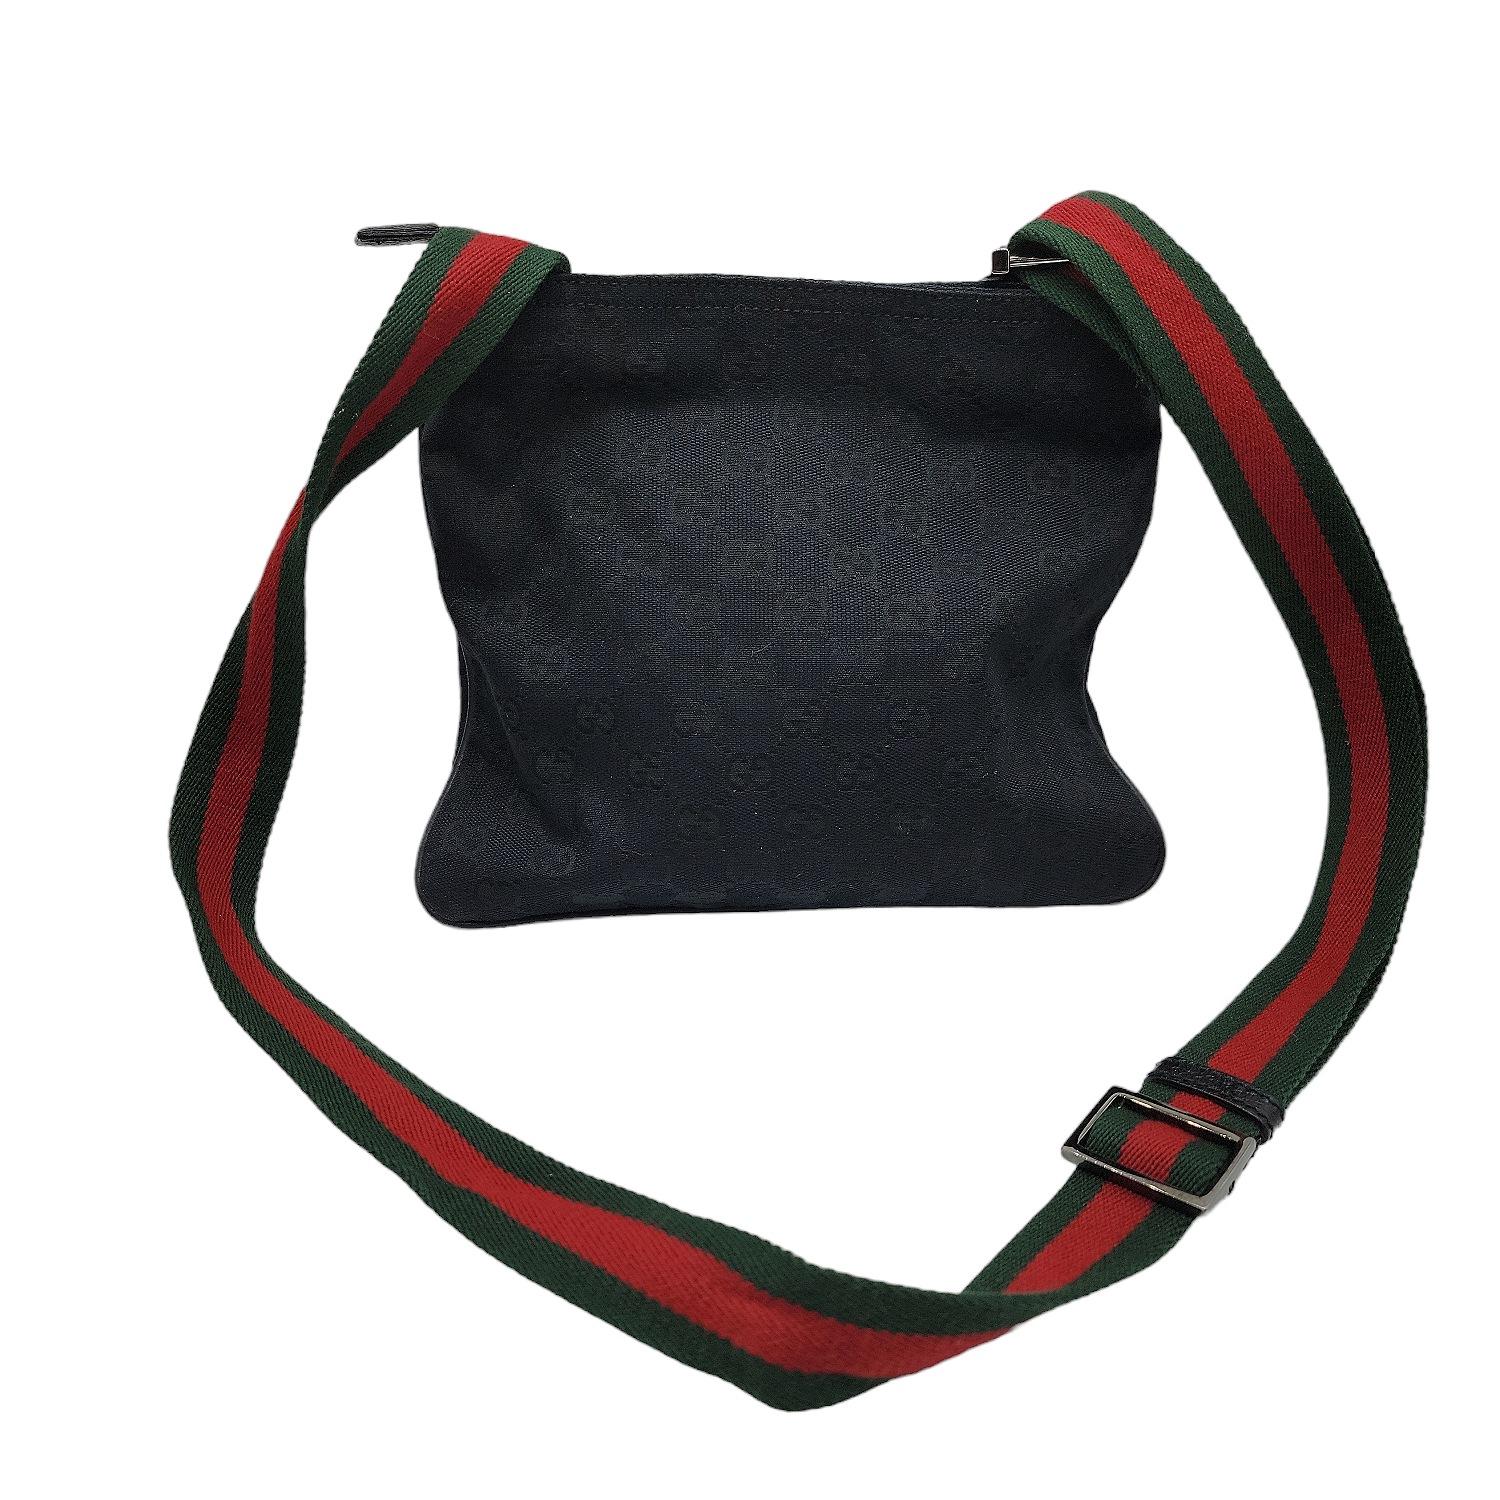 Black GG canvas Gucci small messenger bag with gunmetal hardware, single green and red Web-trimmed adjustable shoulder strap, debossed logo placard at front face, tonal leather trim and piping, tonal woven lining, single zip pocket at interior wall